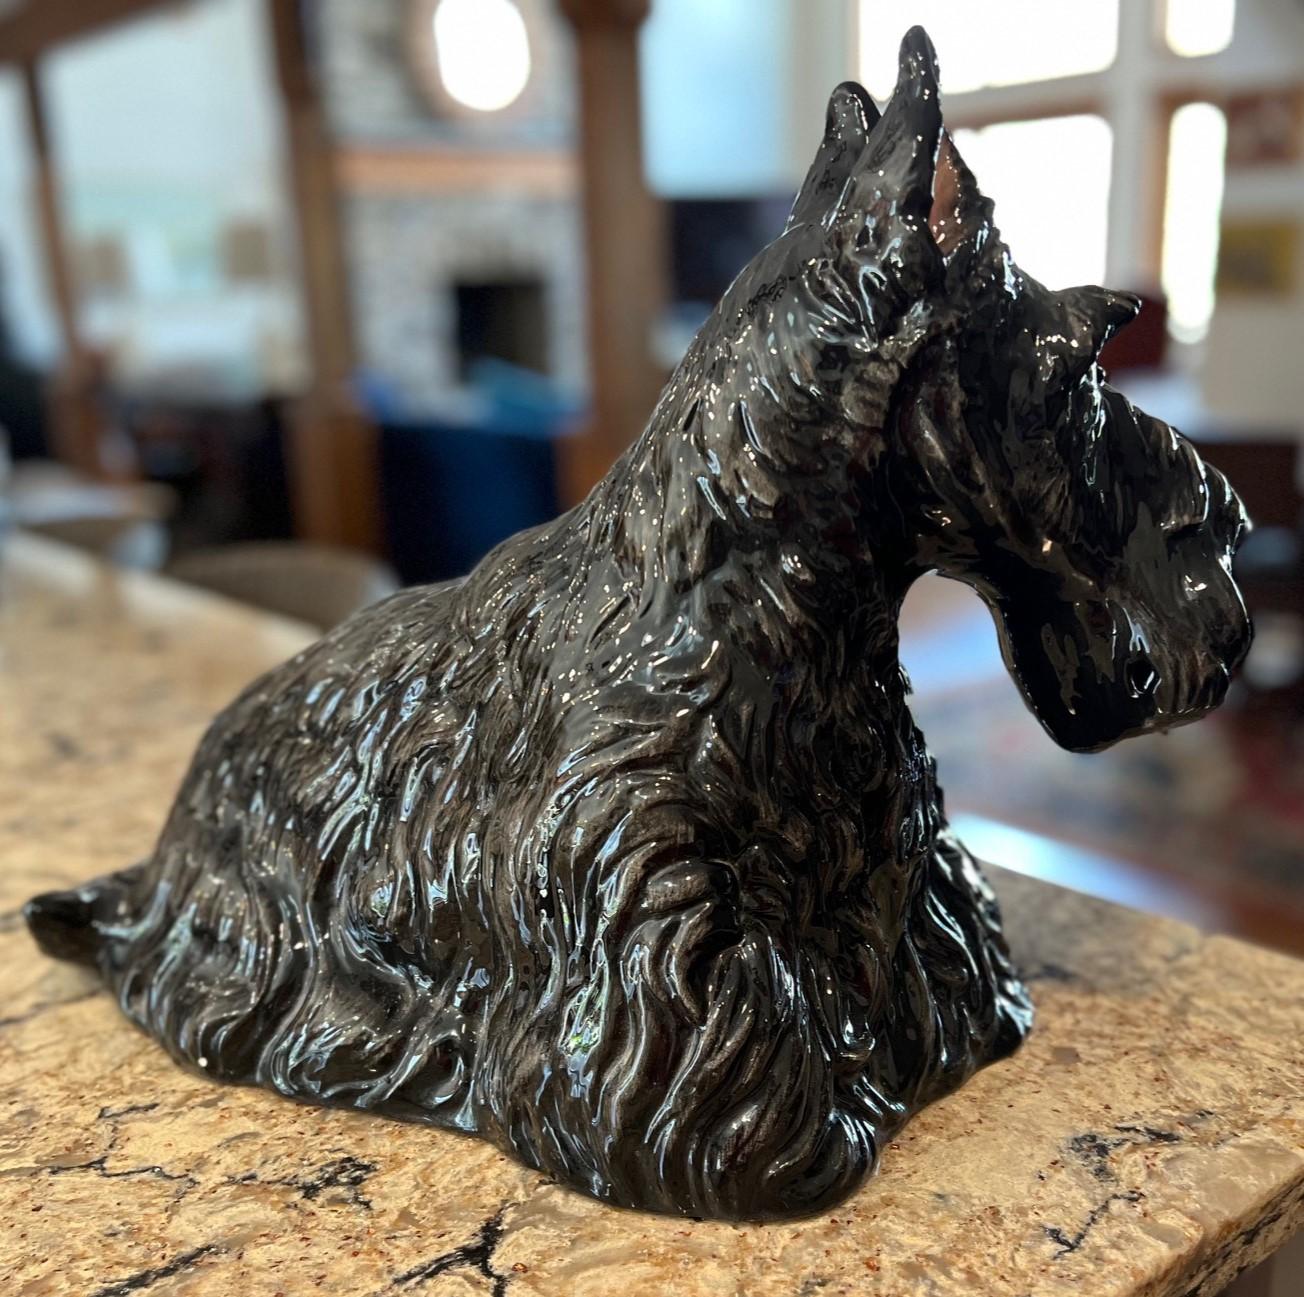 American Vintage Ceramic Scottie Dog Figure - The Townsend Ceramic and Glass Co. Florida For Sale